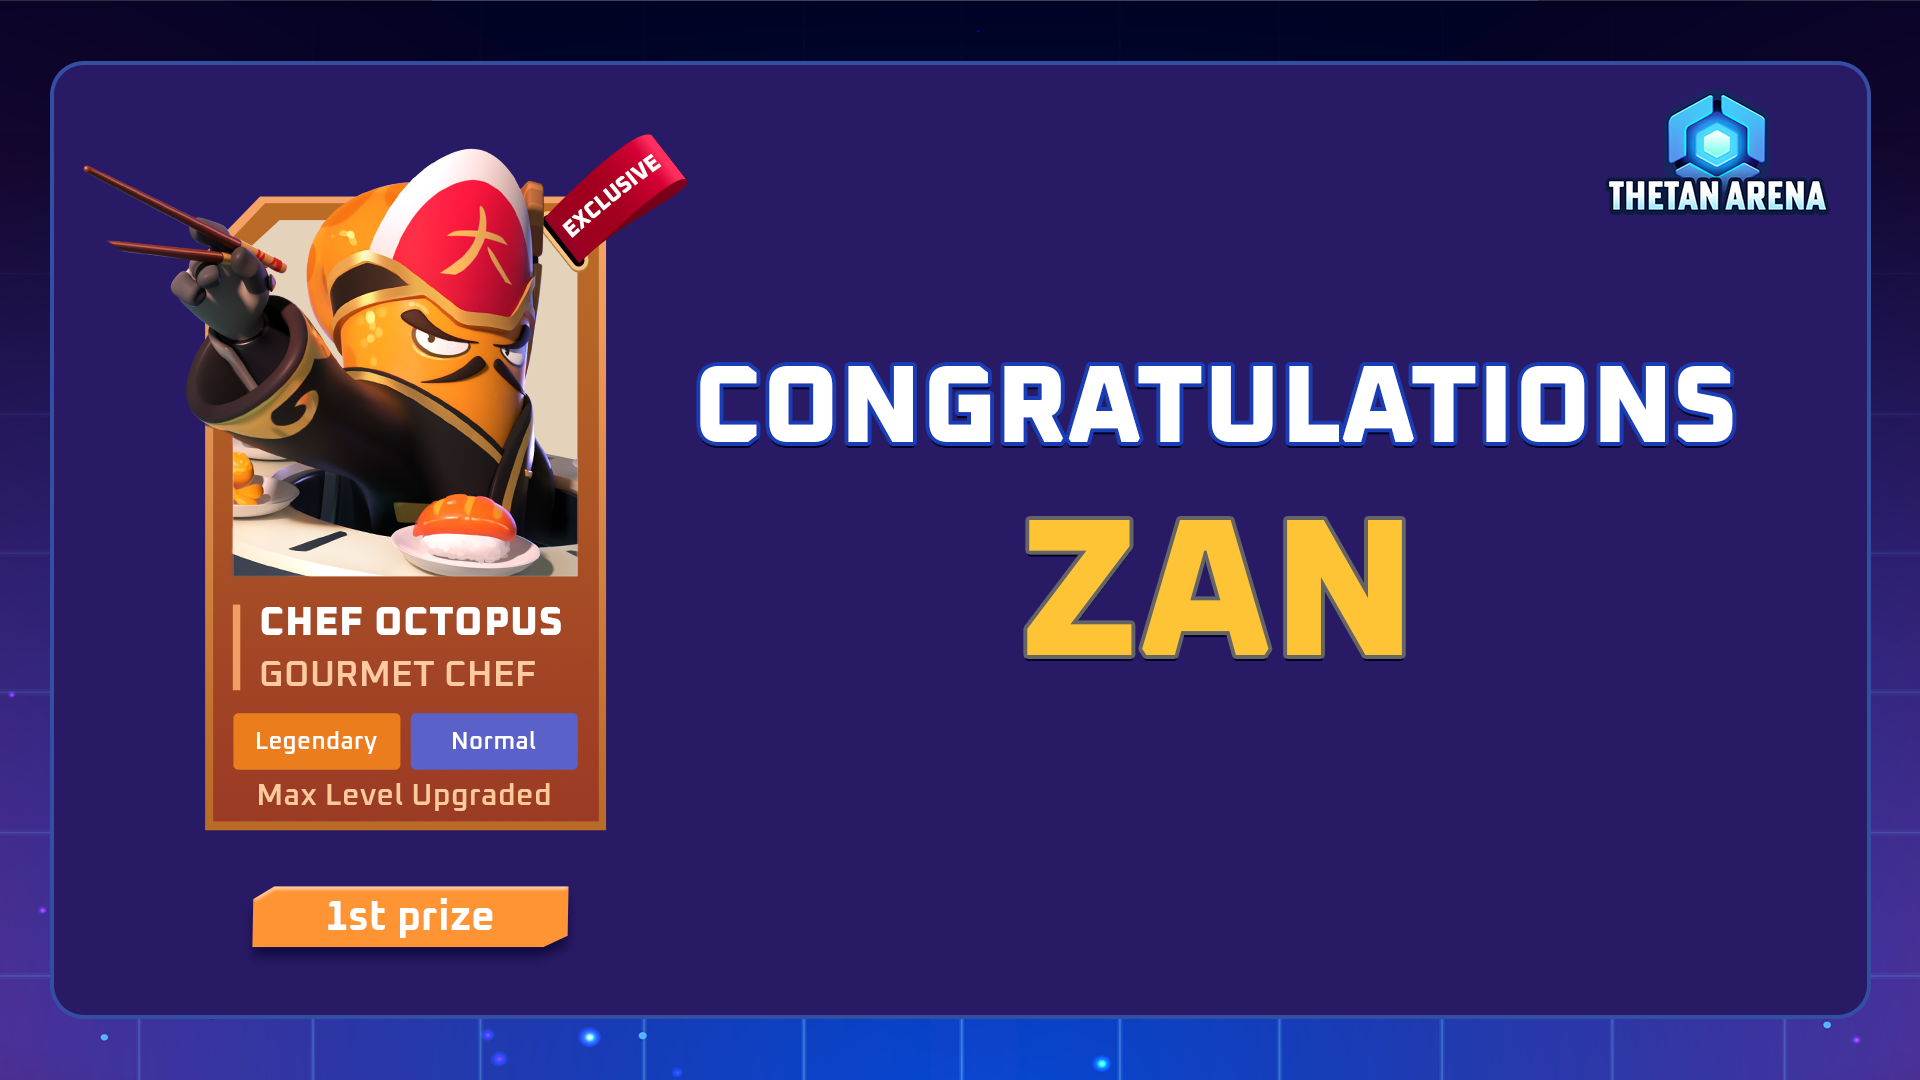 1st prize of Lucky Draw: A max-levelled new Legendary hero Chef Octopus